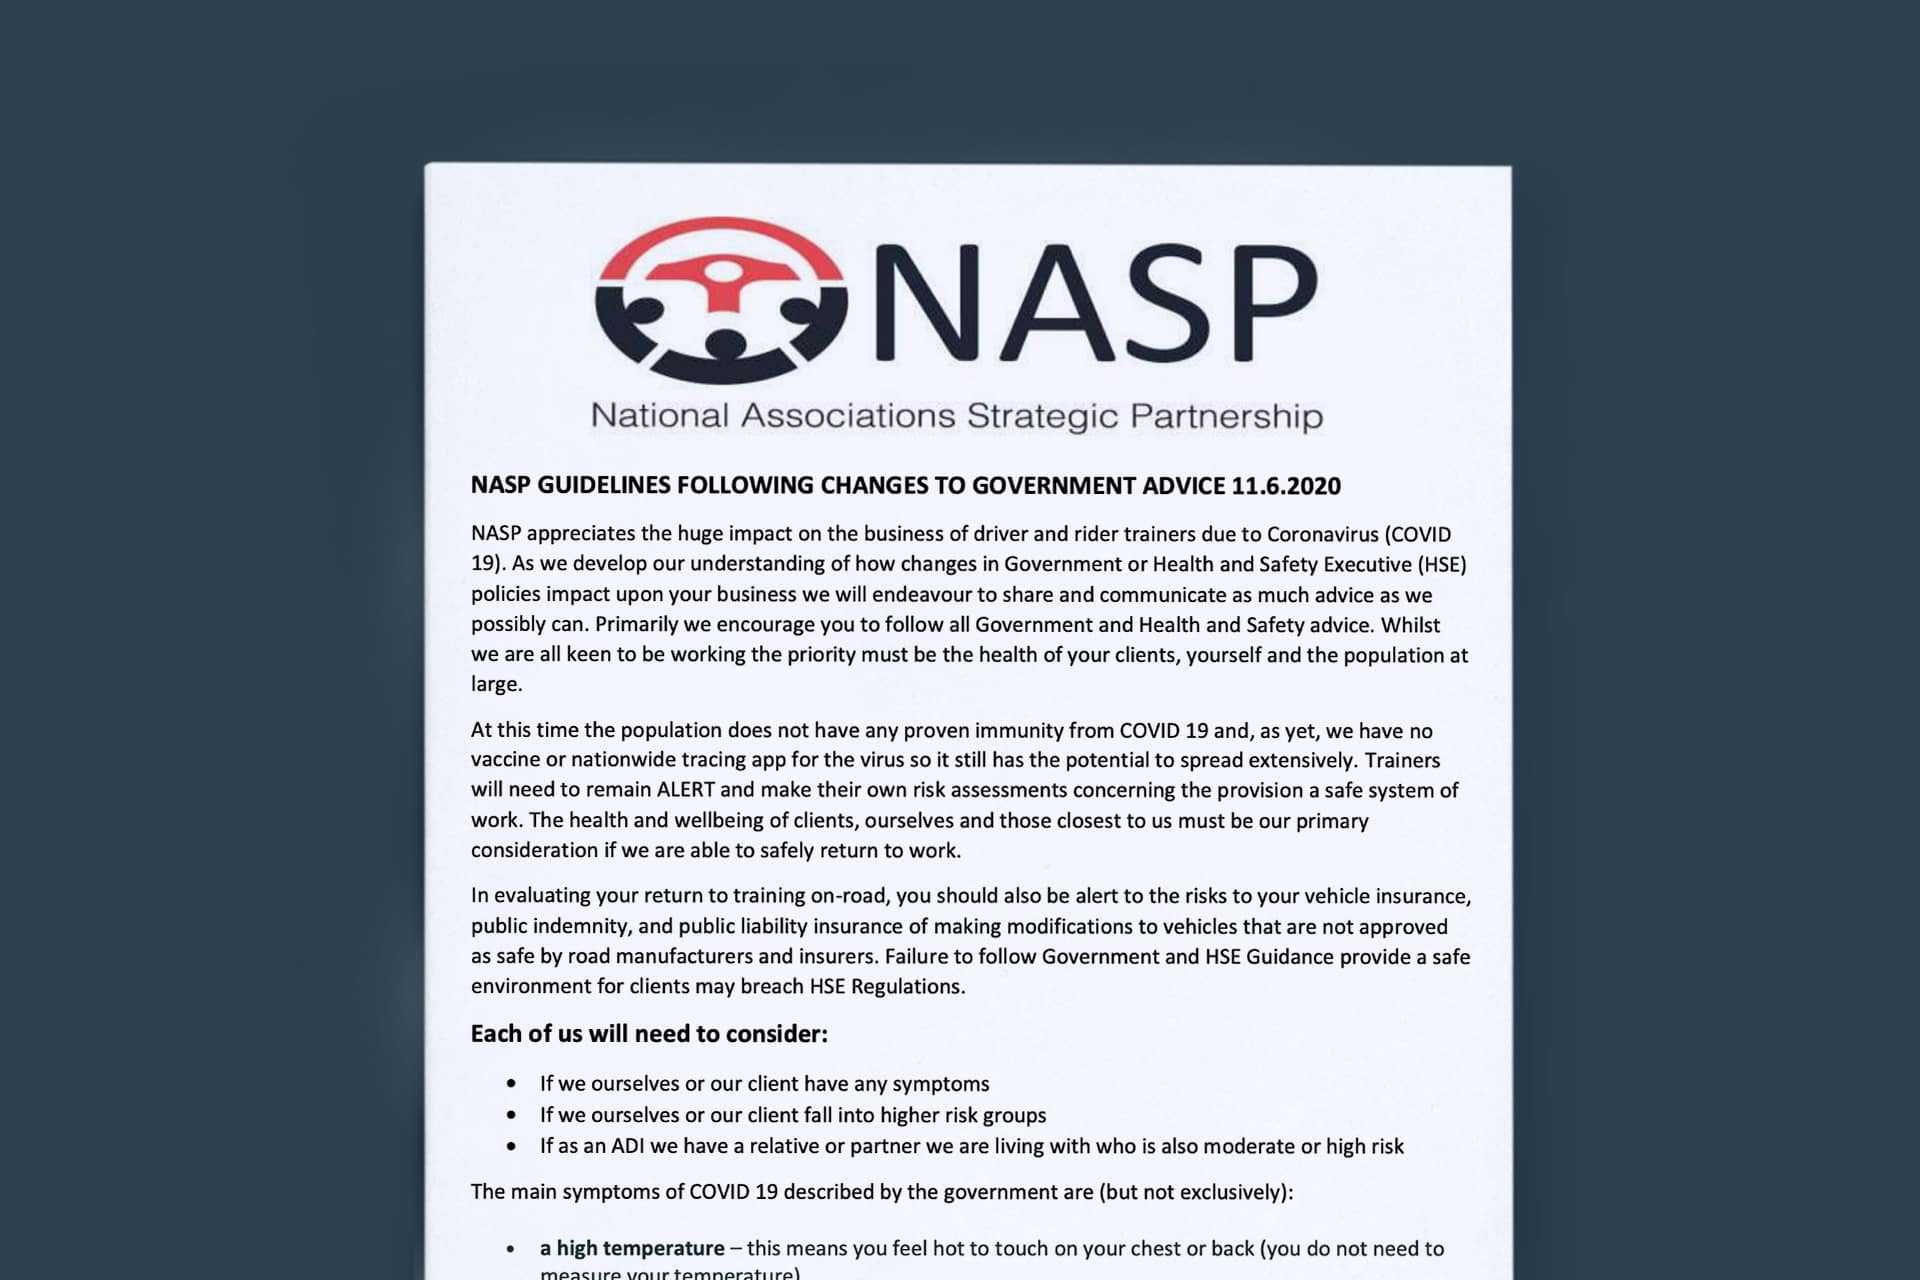 NASP Guidelines Following Changes To Government Advice